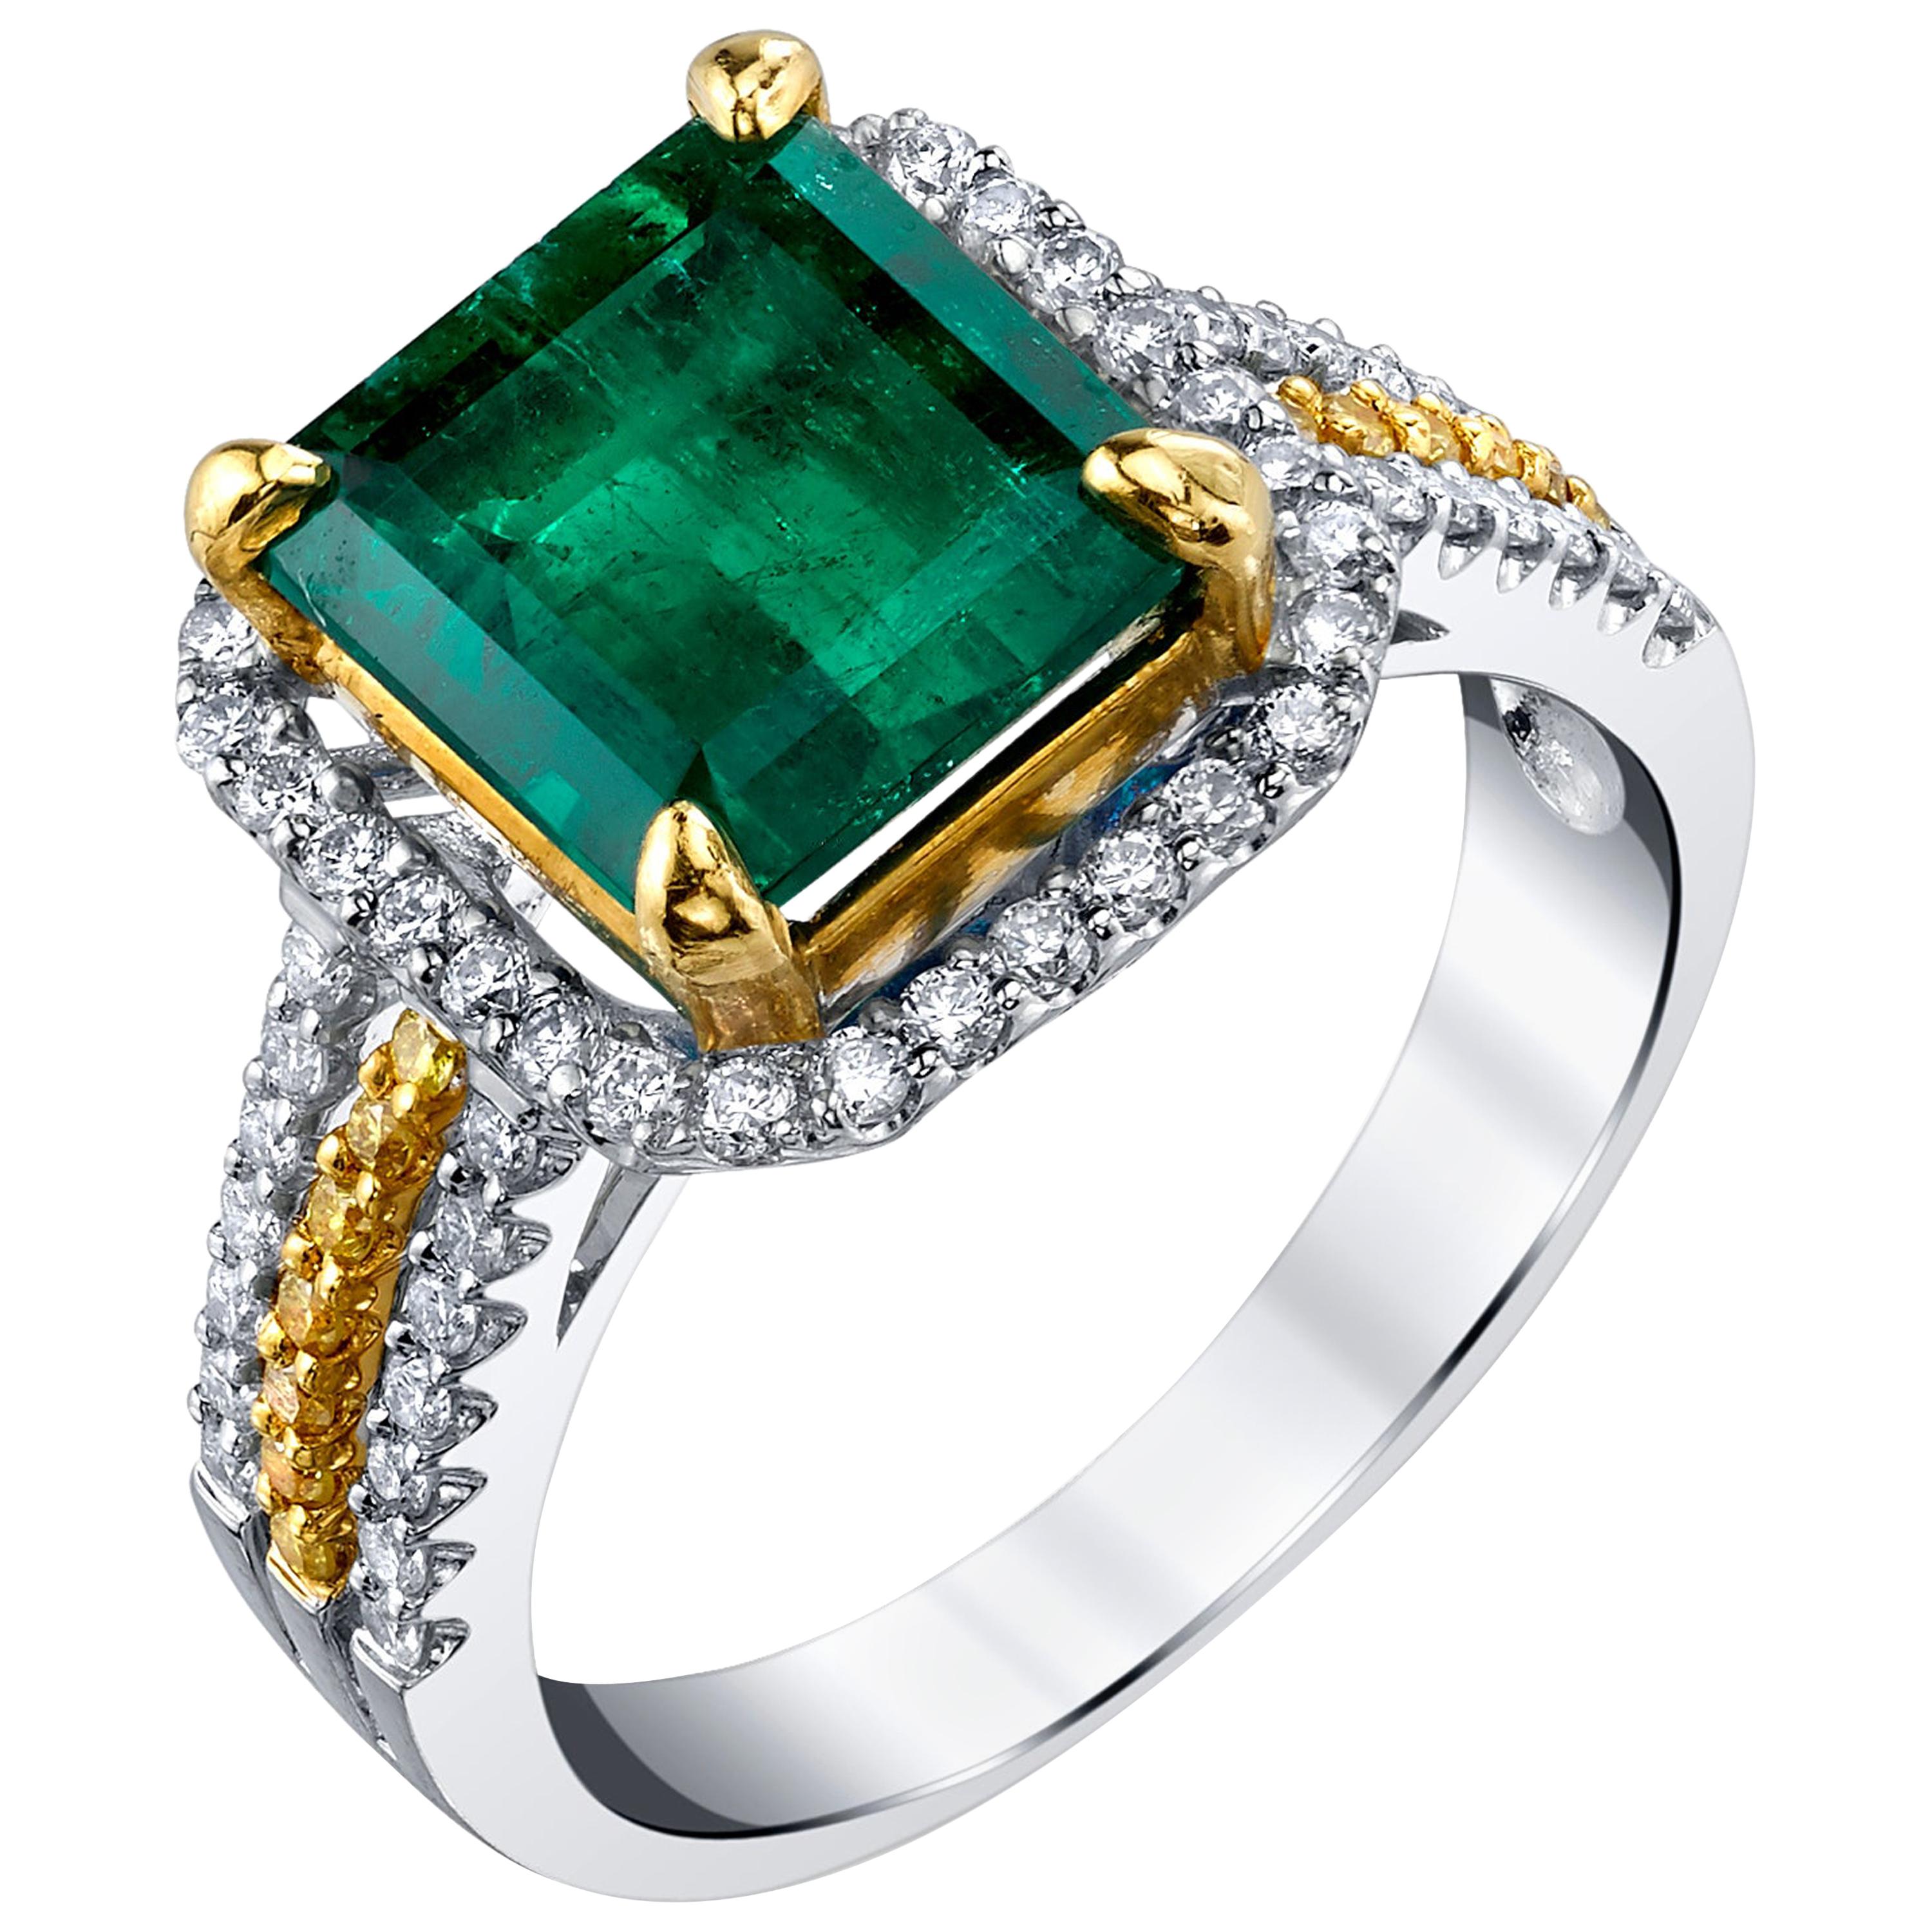 2.85 Carat Emerald Cocktail Ring with Canary and White Diamonds in 18k Gold